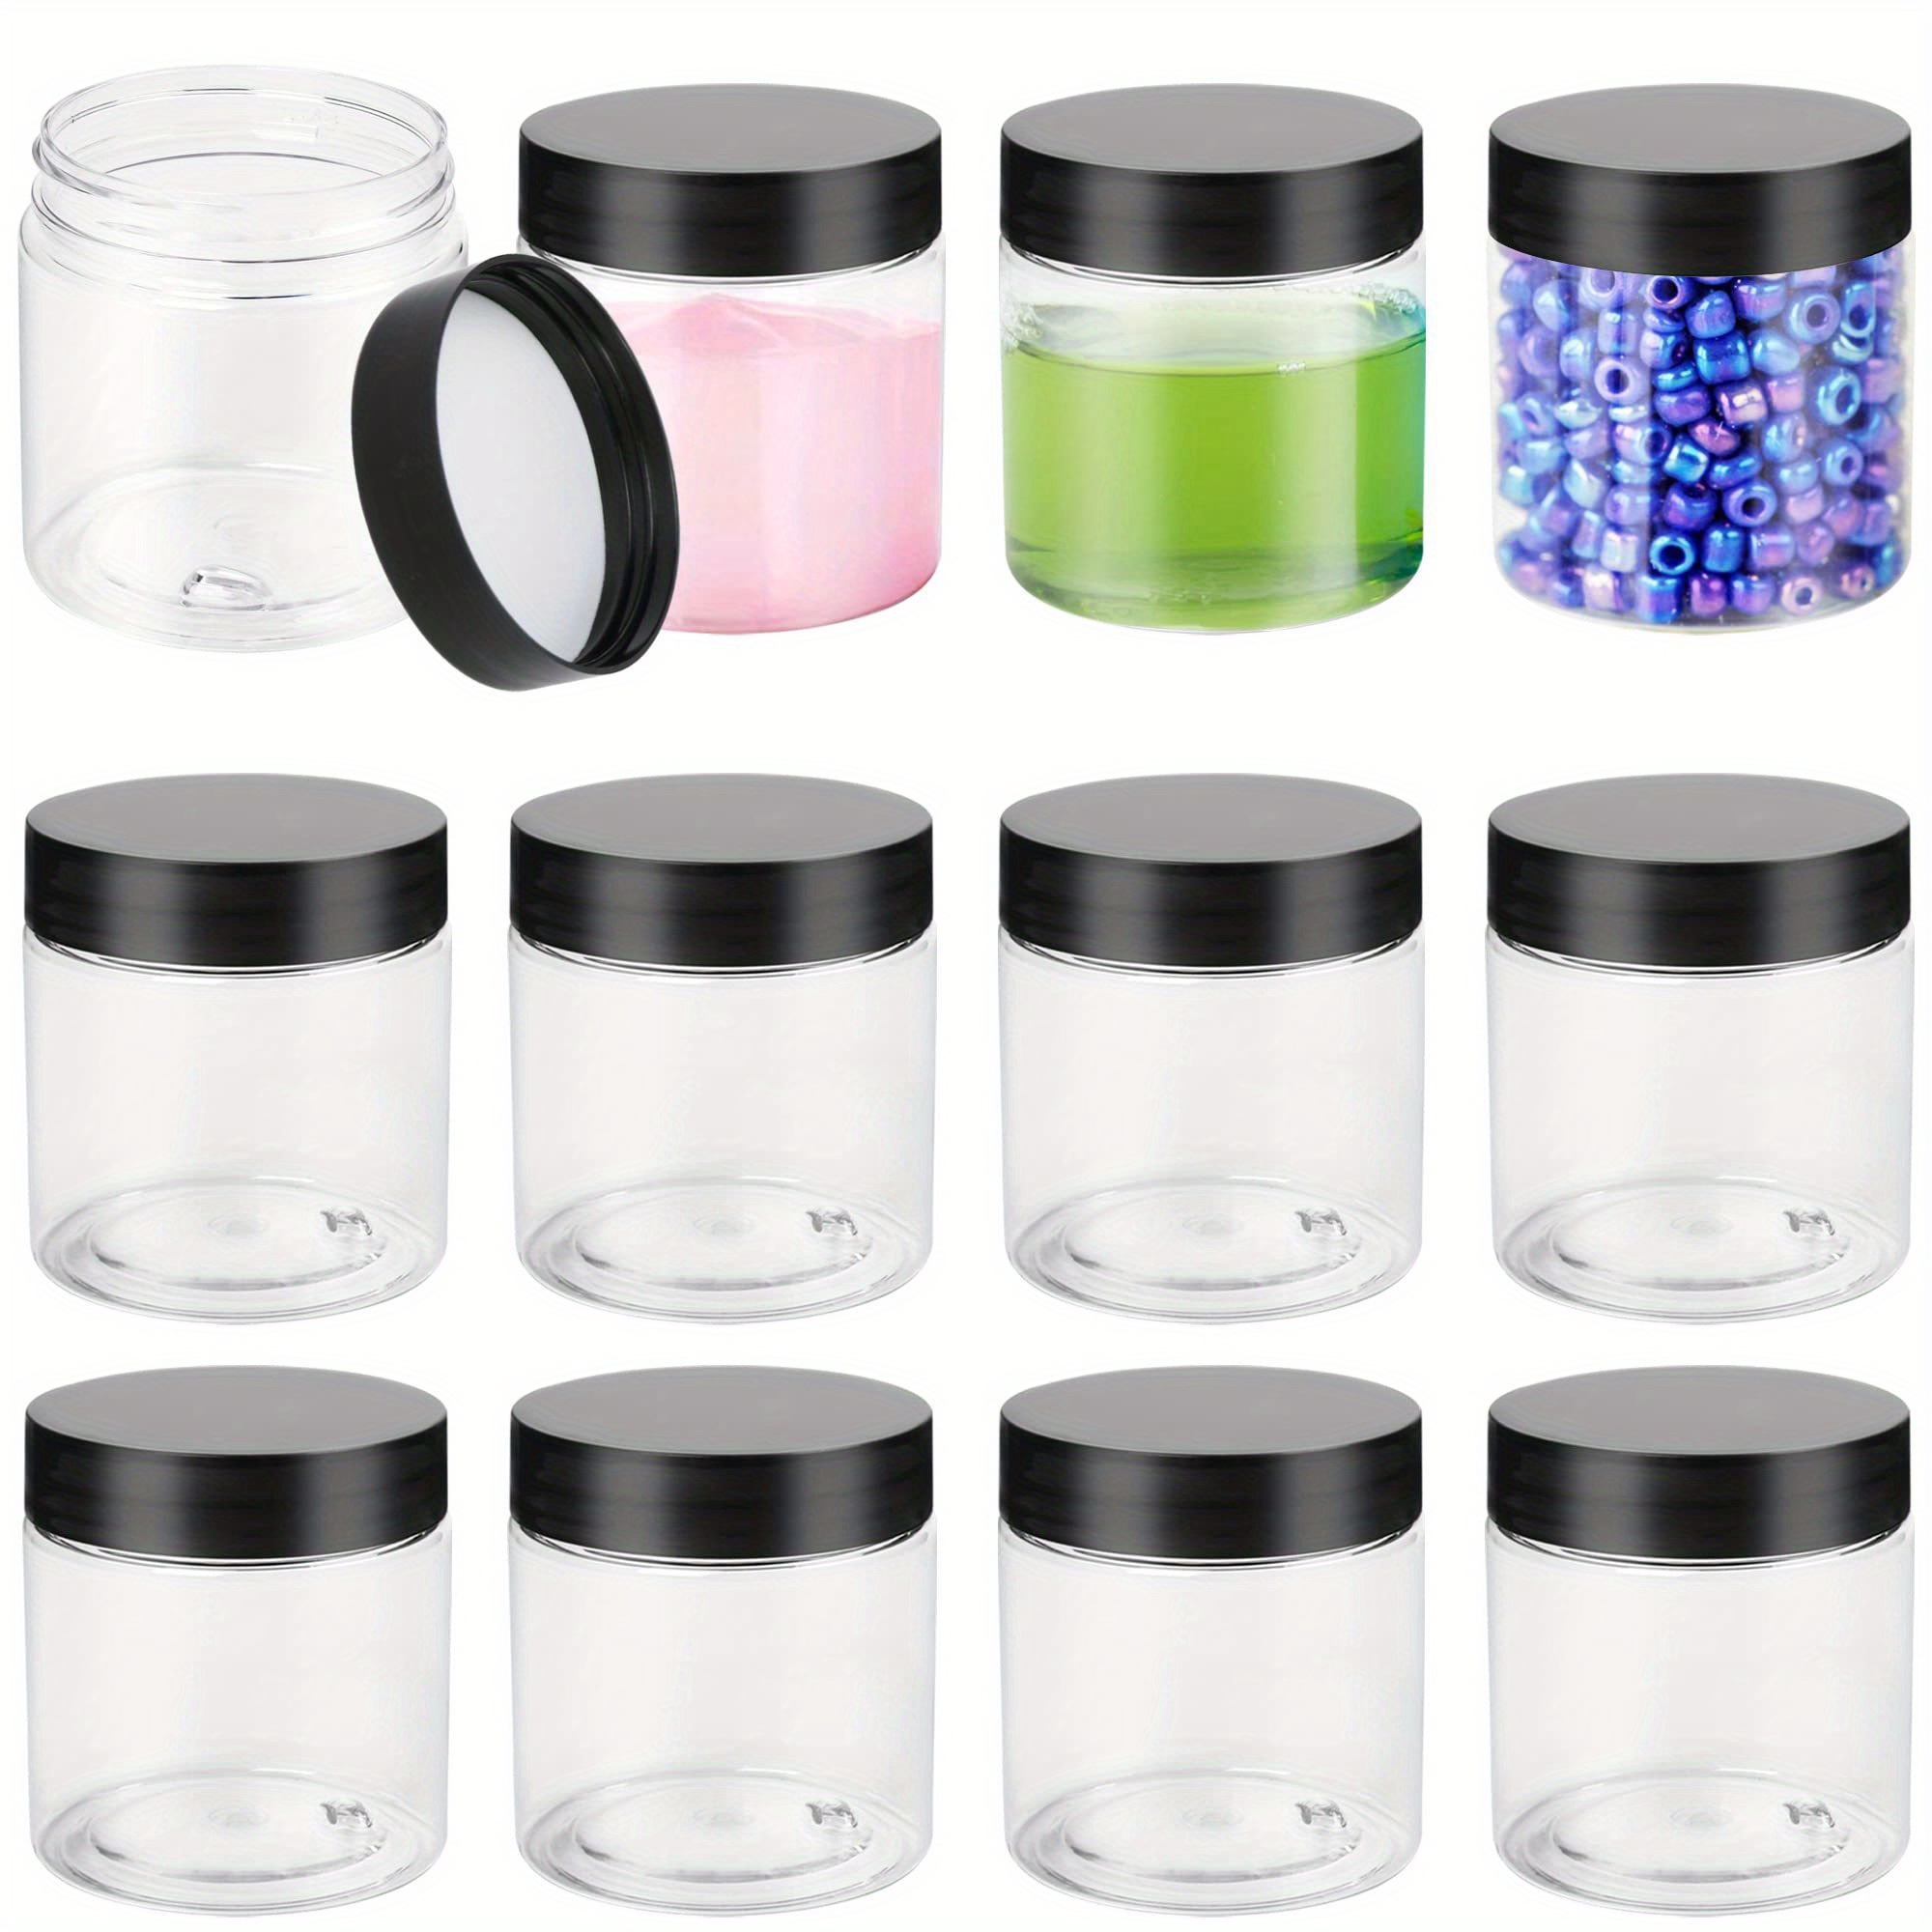 

12pcs 4oz Clear Plastic Jars With Black Lids, Round Cosmetic Containers For Lotion, Cream, Ointments, Makeup, Eye Shadow, Rhinestone, Samples, Diy Art Craft, Travel Accessories